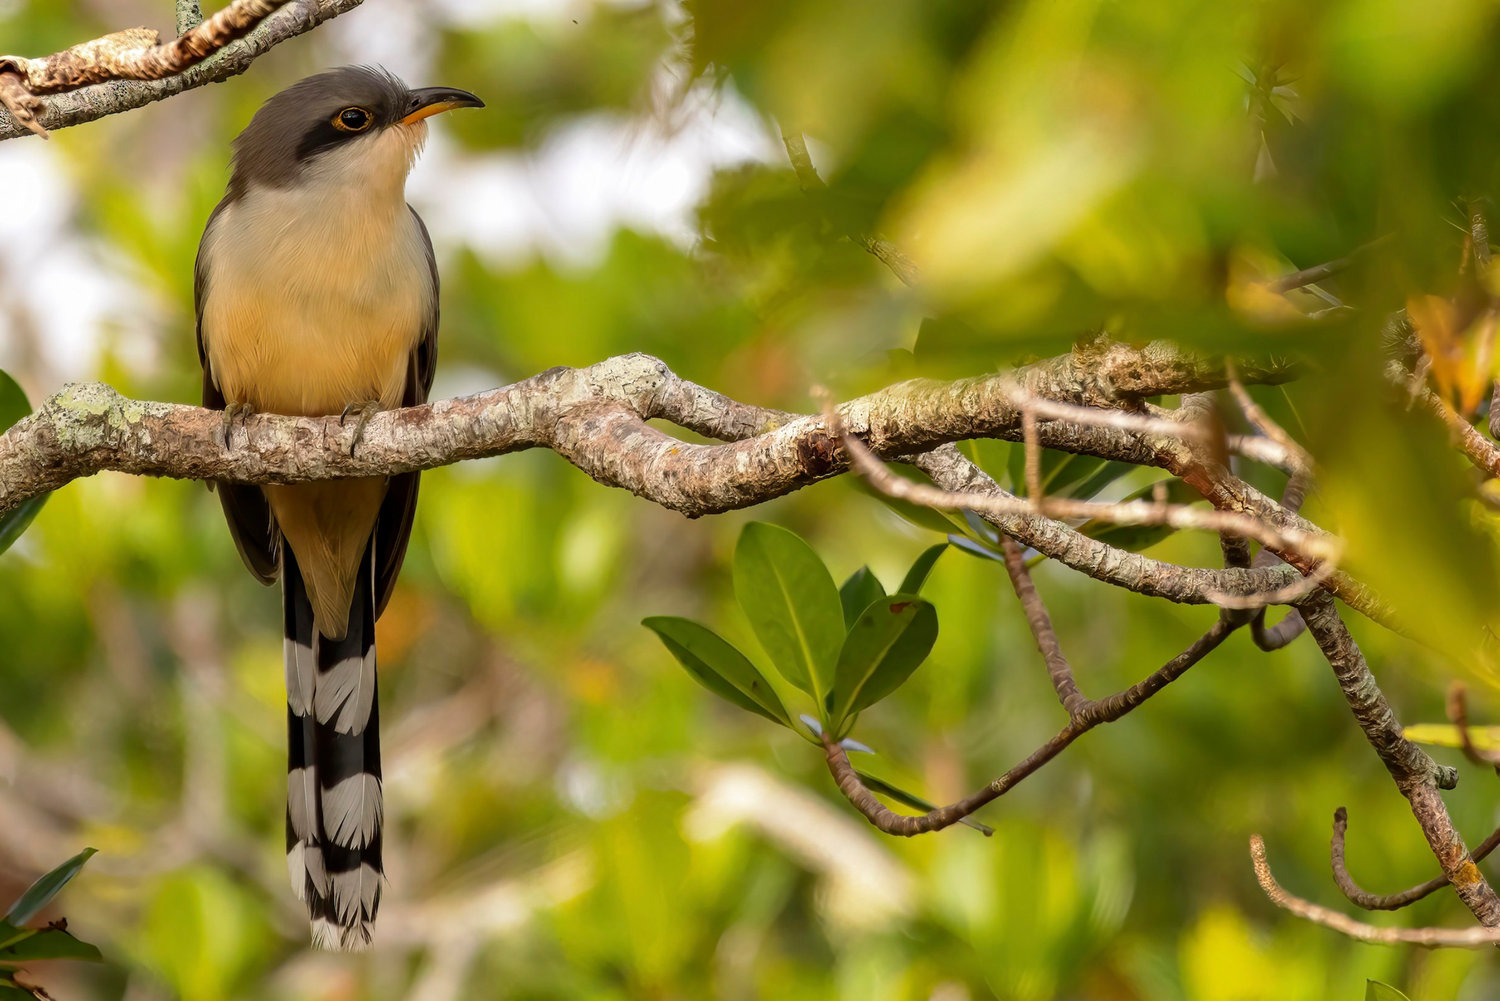 This image provided by Macaulay Library/Cornell Lab of Ornithology shows a mangrove cuckoo. The slender, long-tailed mangrove cuckoo, which has a large range in southern Florida, the Caribbean and Latin America, is among species likely to be spotted by participants in the Great Backyard Bird Watch, running Feb. 17-20. The global count by volunteers helps scientists studying the decline of bird populations worldwide.